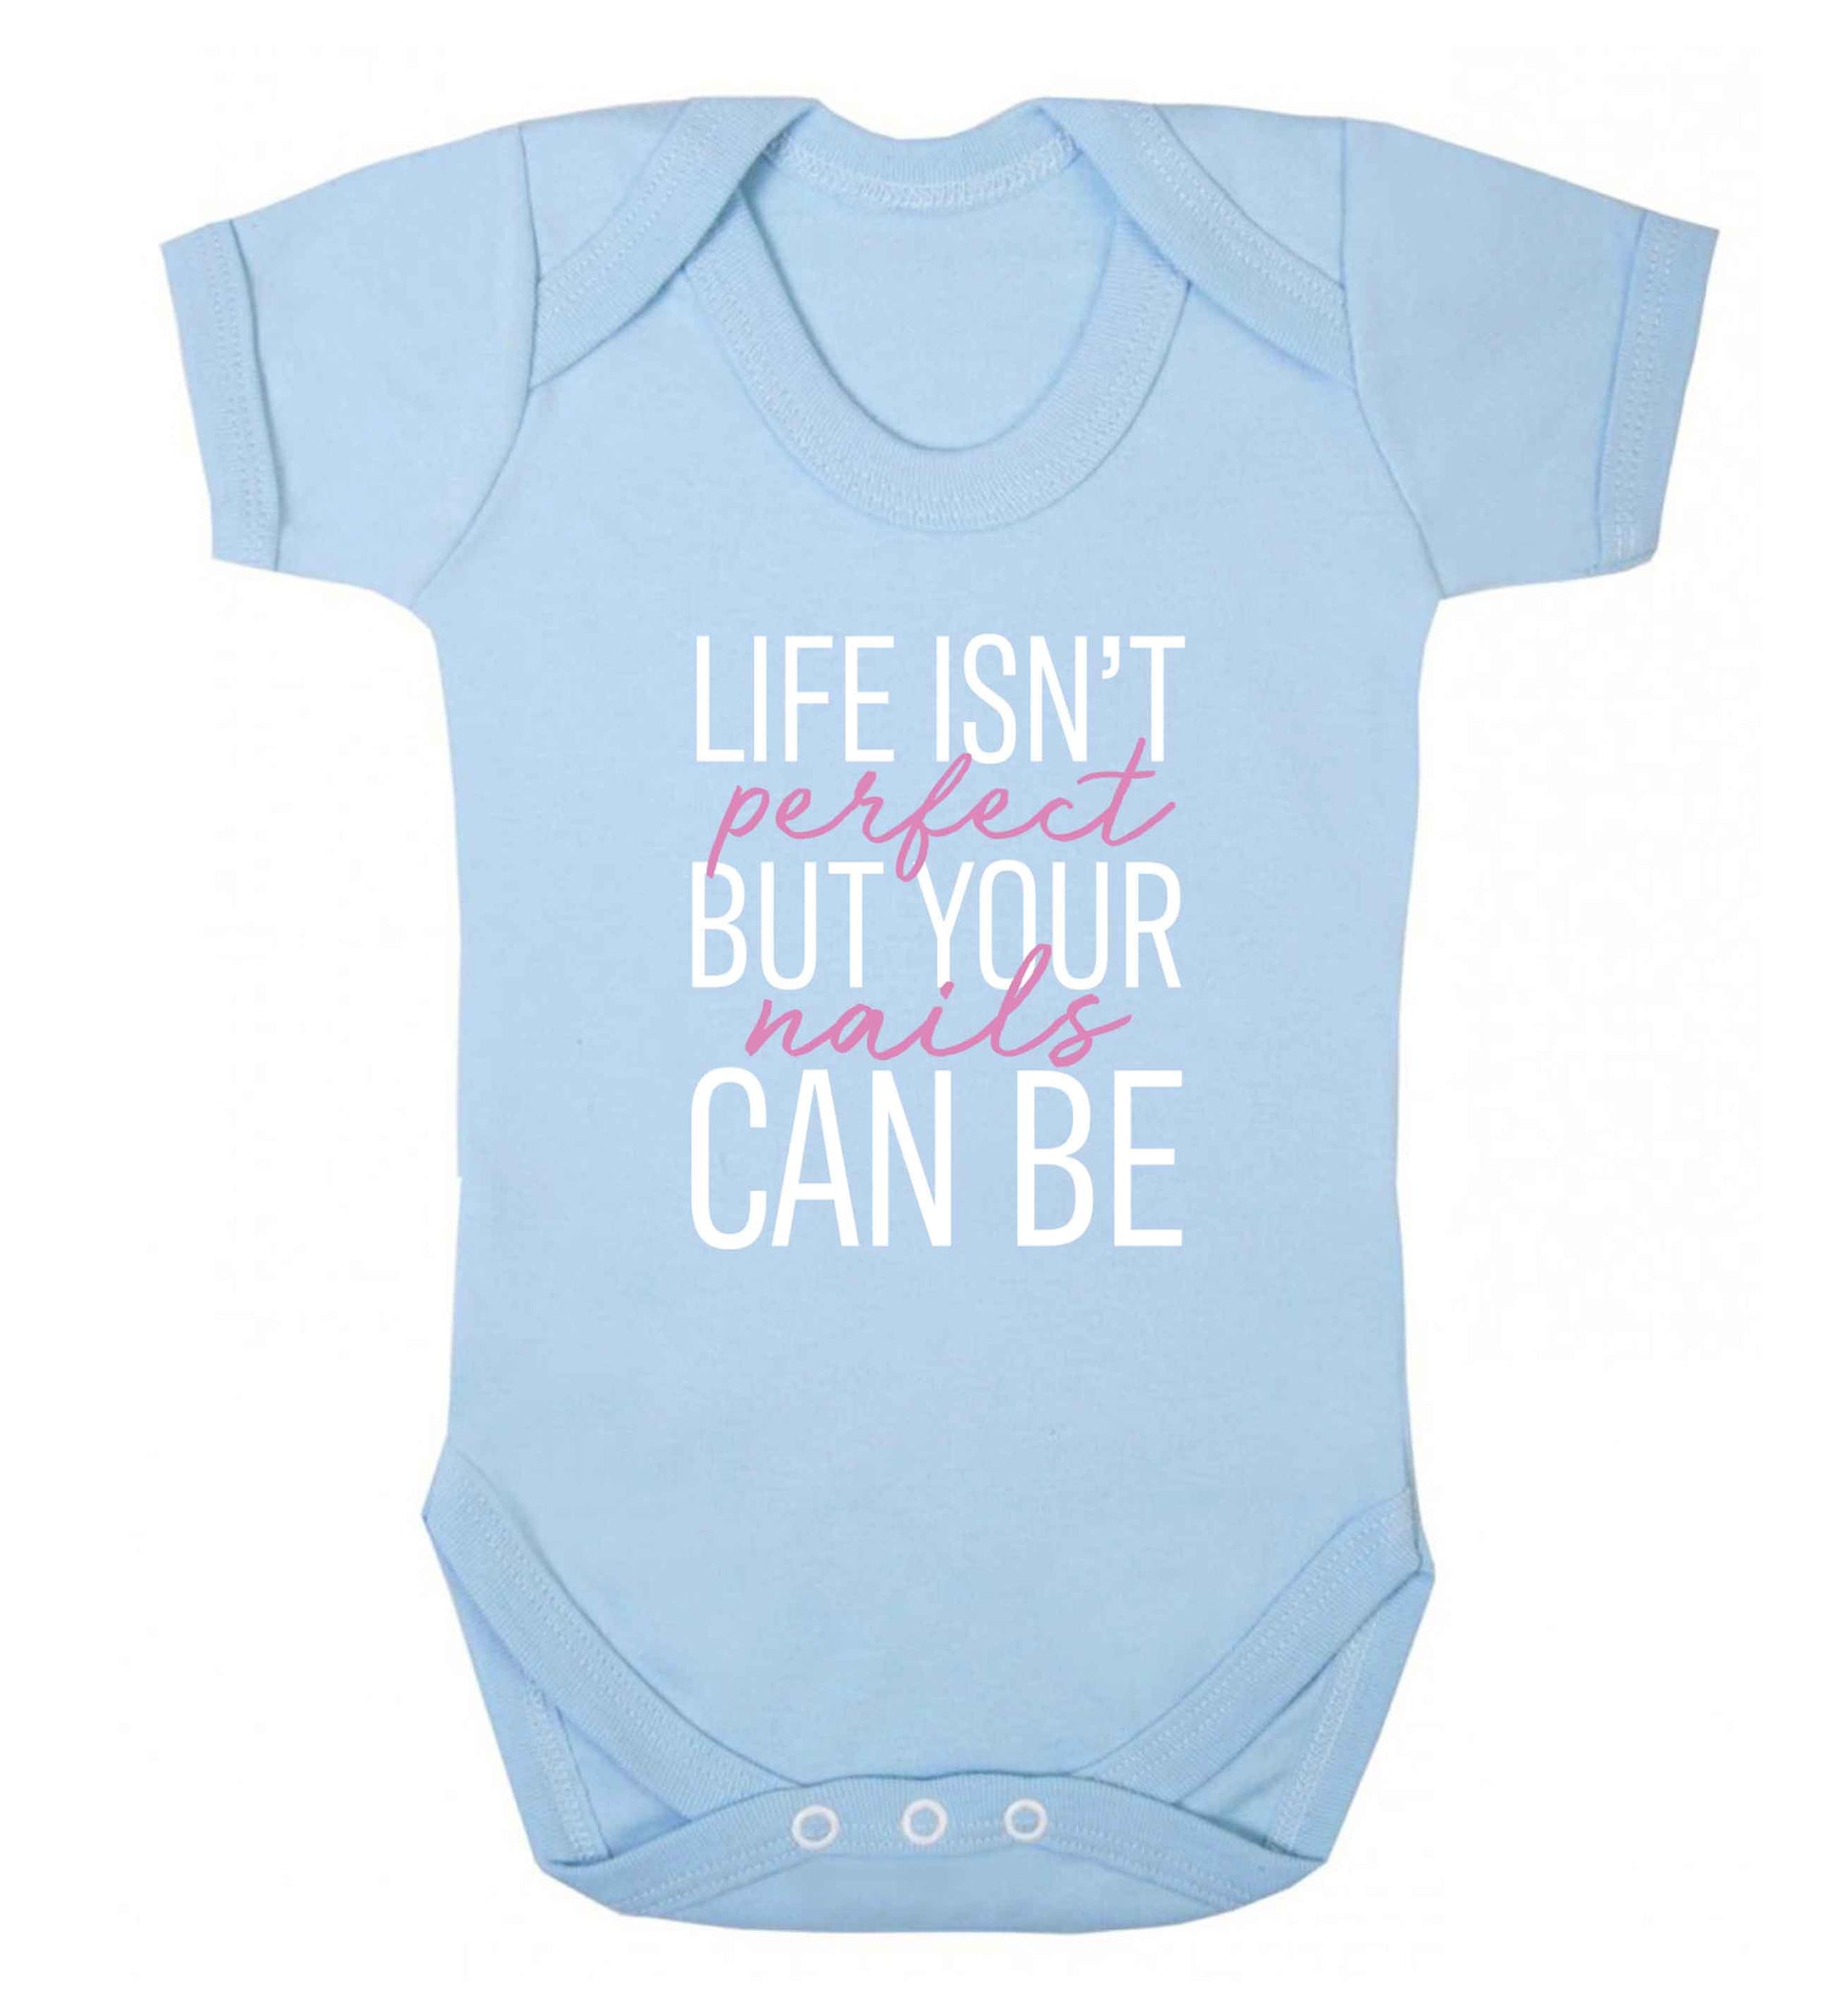 Life isn't perfect but your nails can be baby vest pale blue 18-24 months